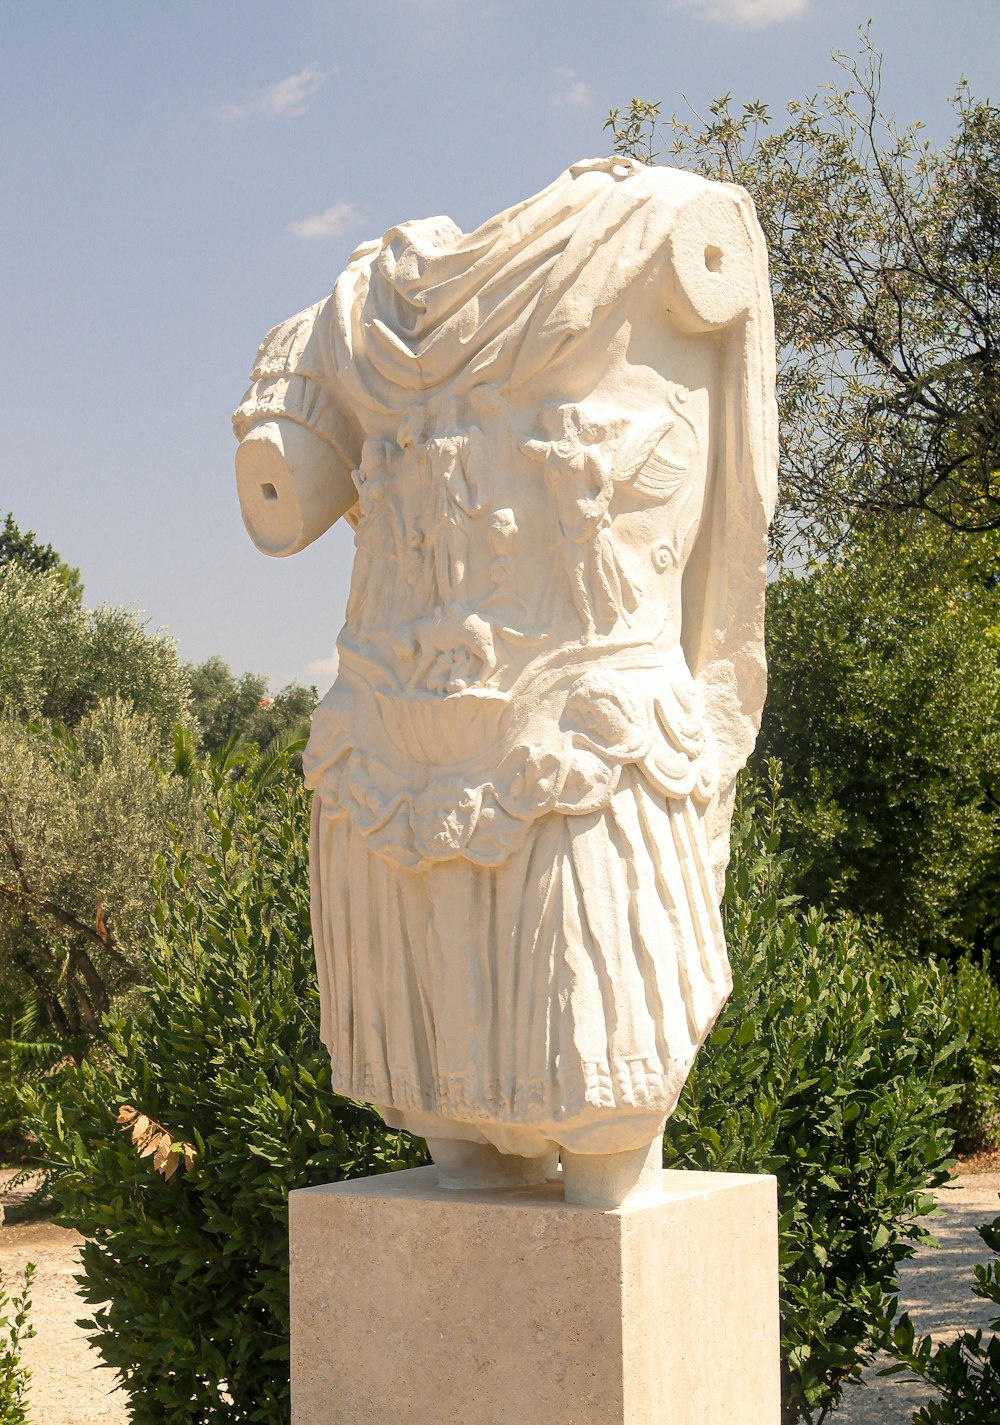 a statue of a man in a white outfit